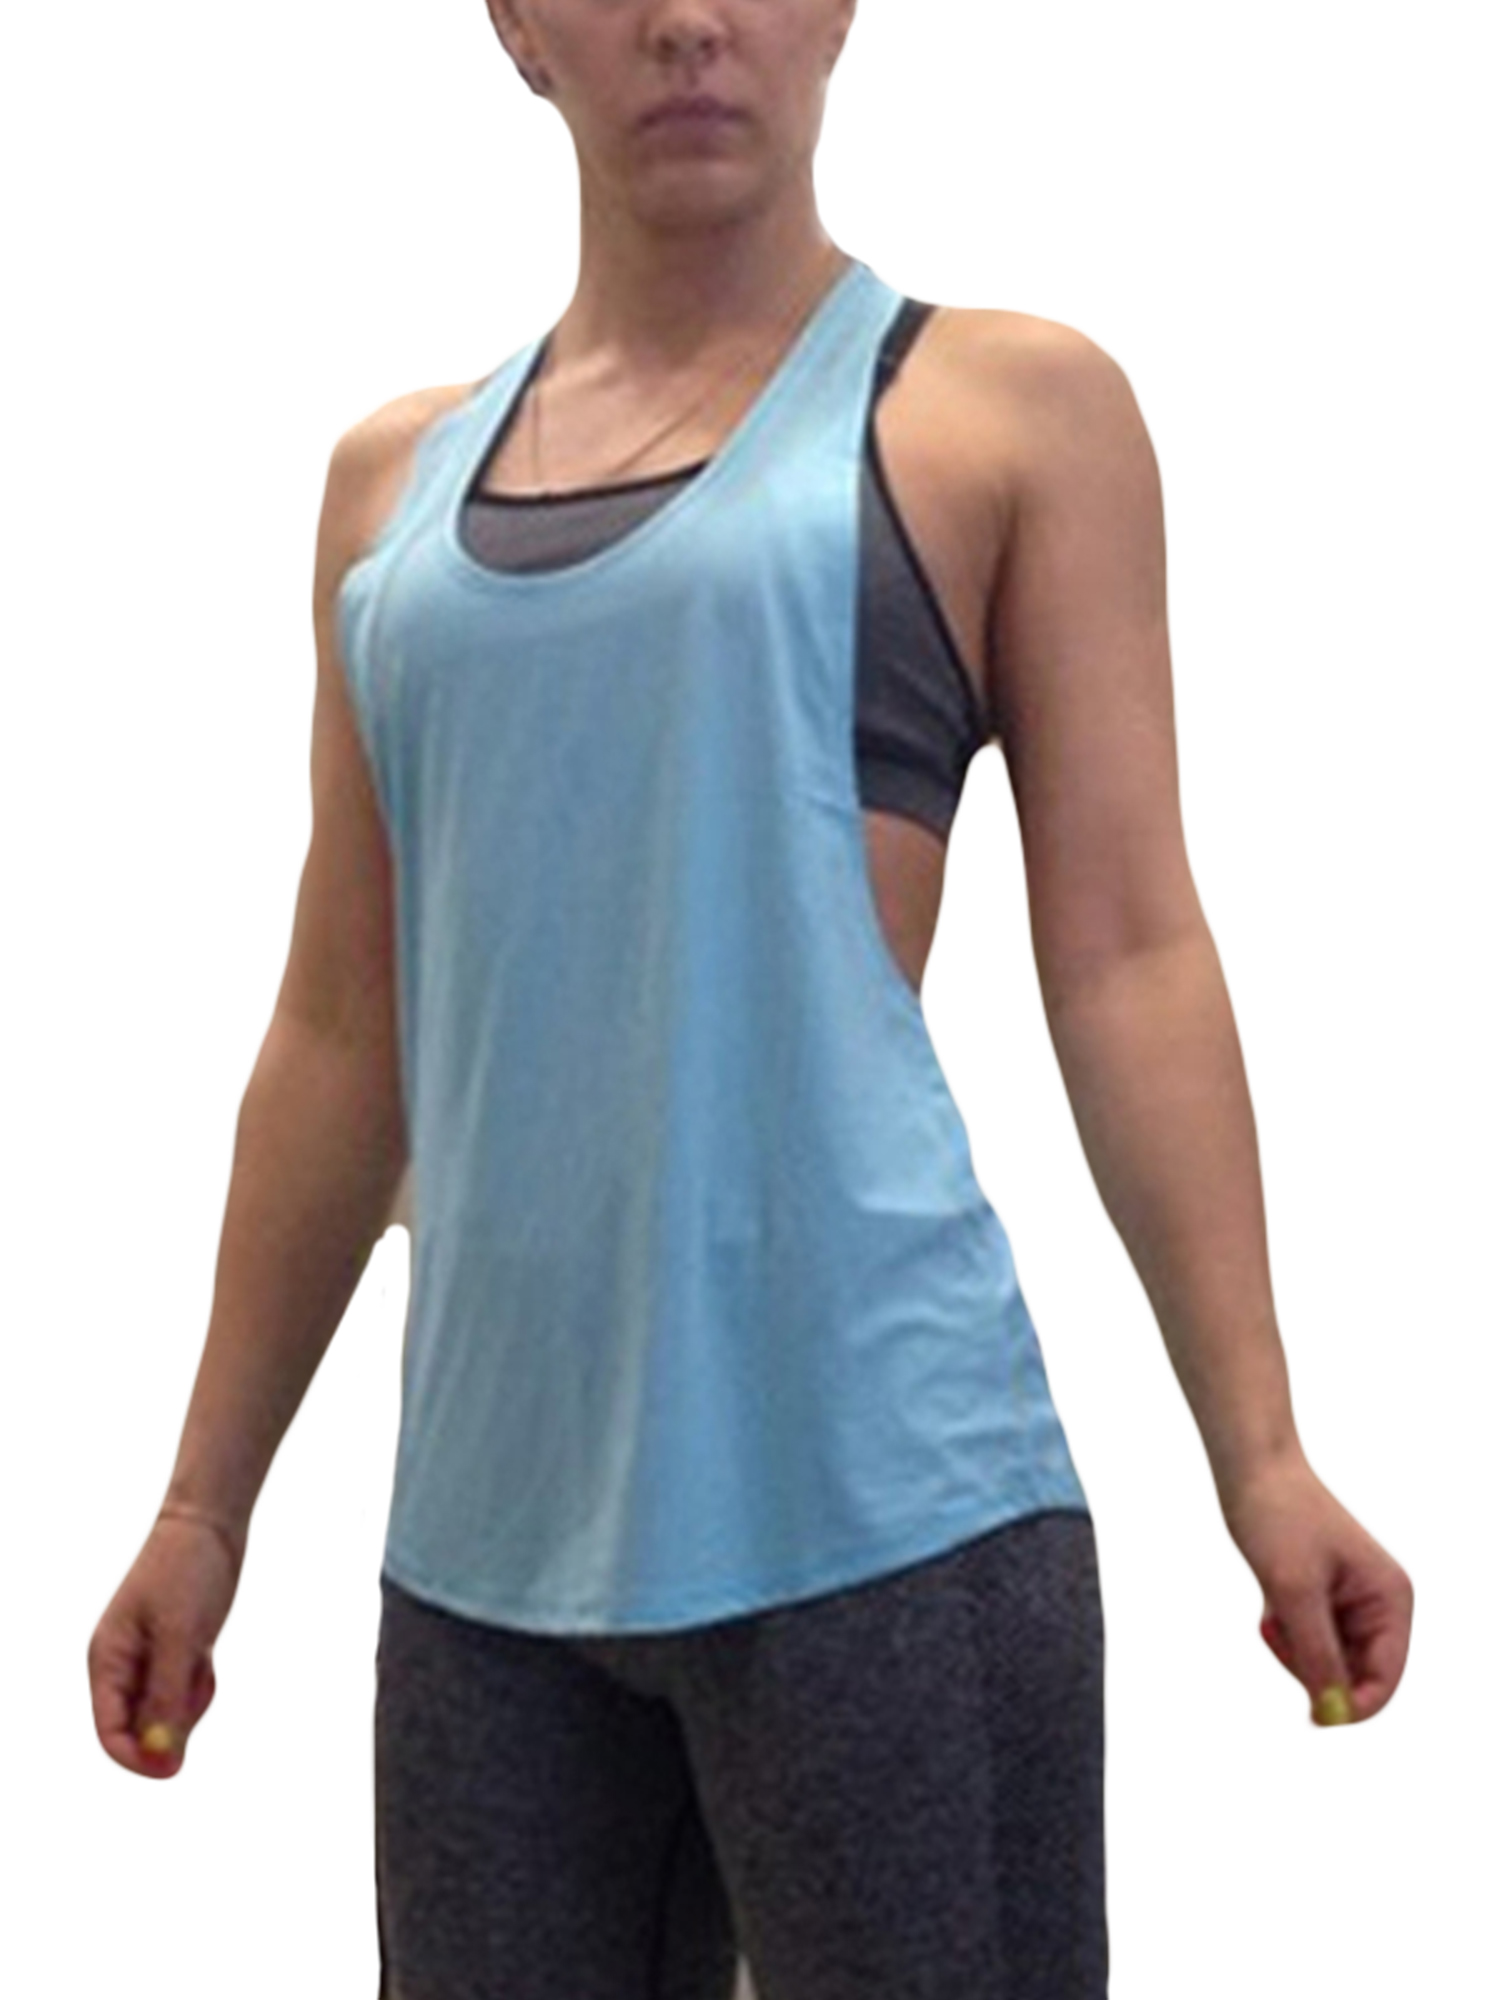 ICTIVE Workout Tank Tops for Women Loose fit Yoga Tops for Women Summer Open Back Muscle Tank Running Tank Tops 